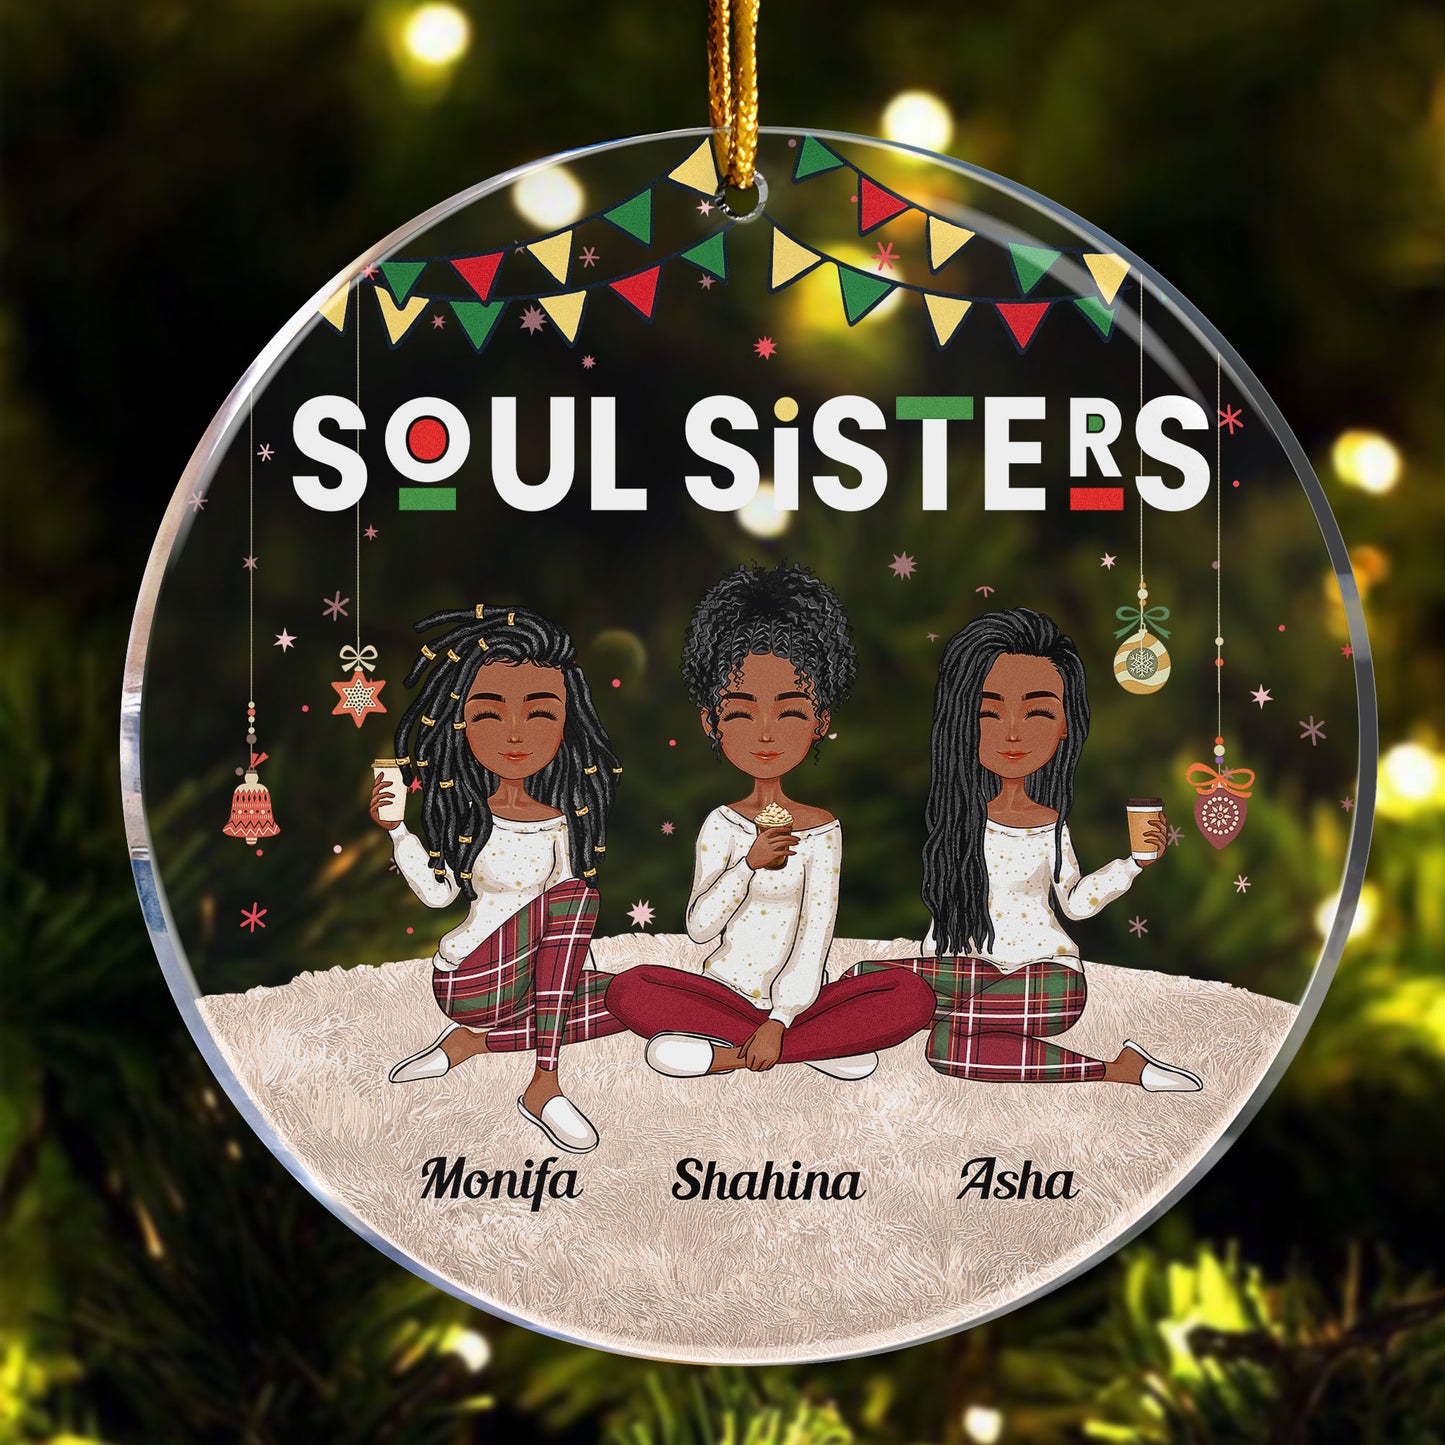 Sistas Forever - Personalized Circle Acrylic Ornament